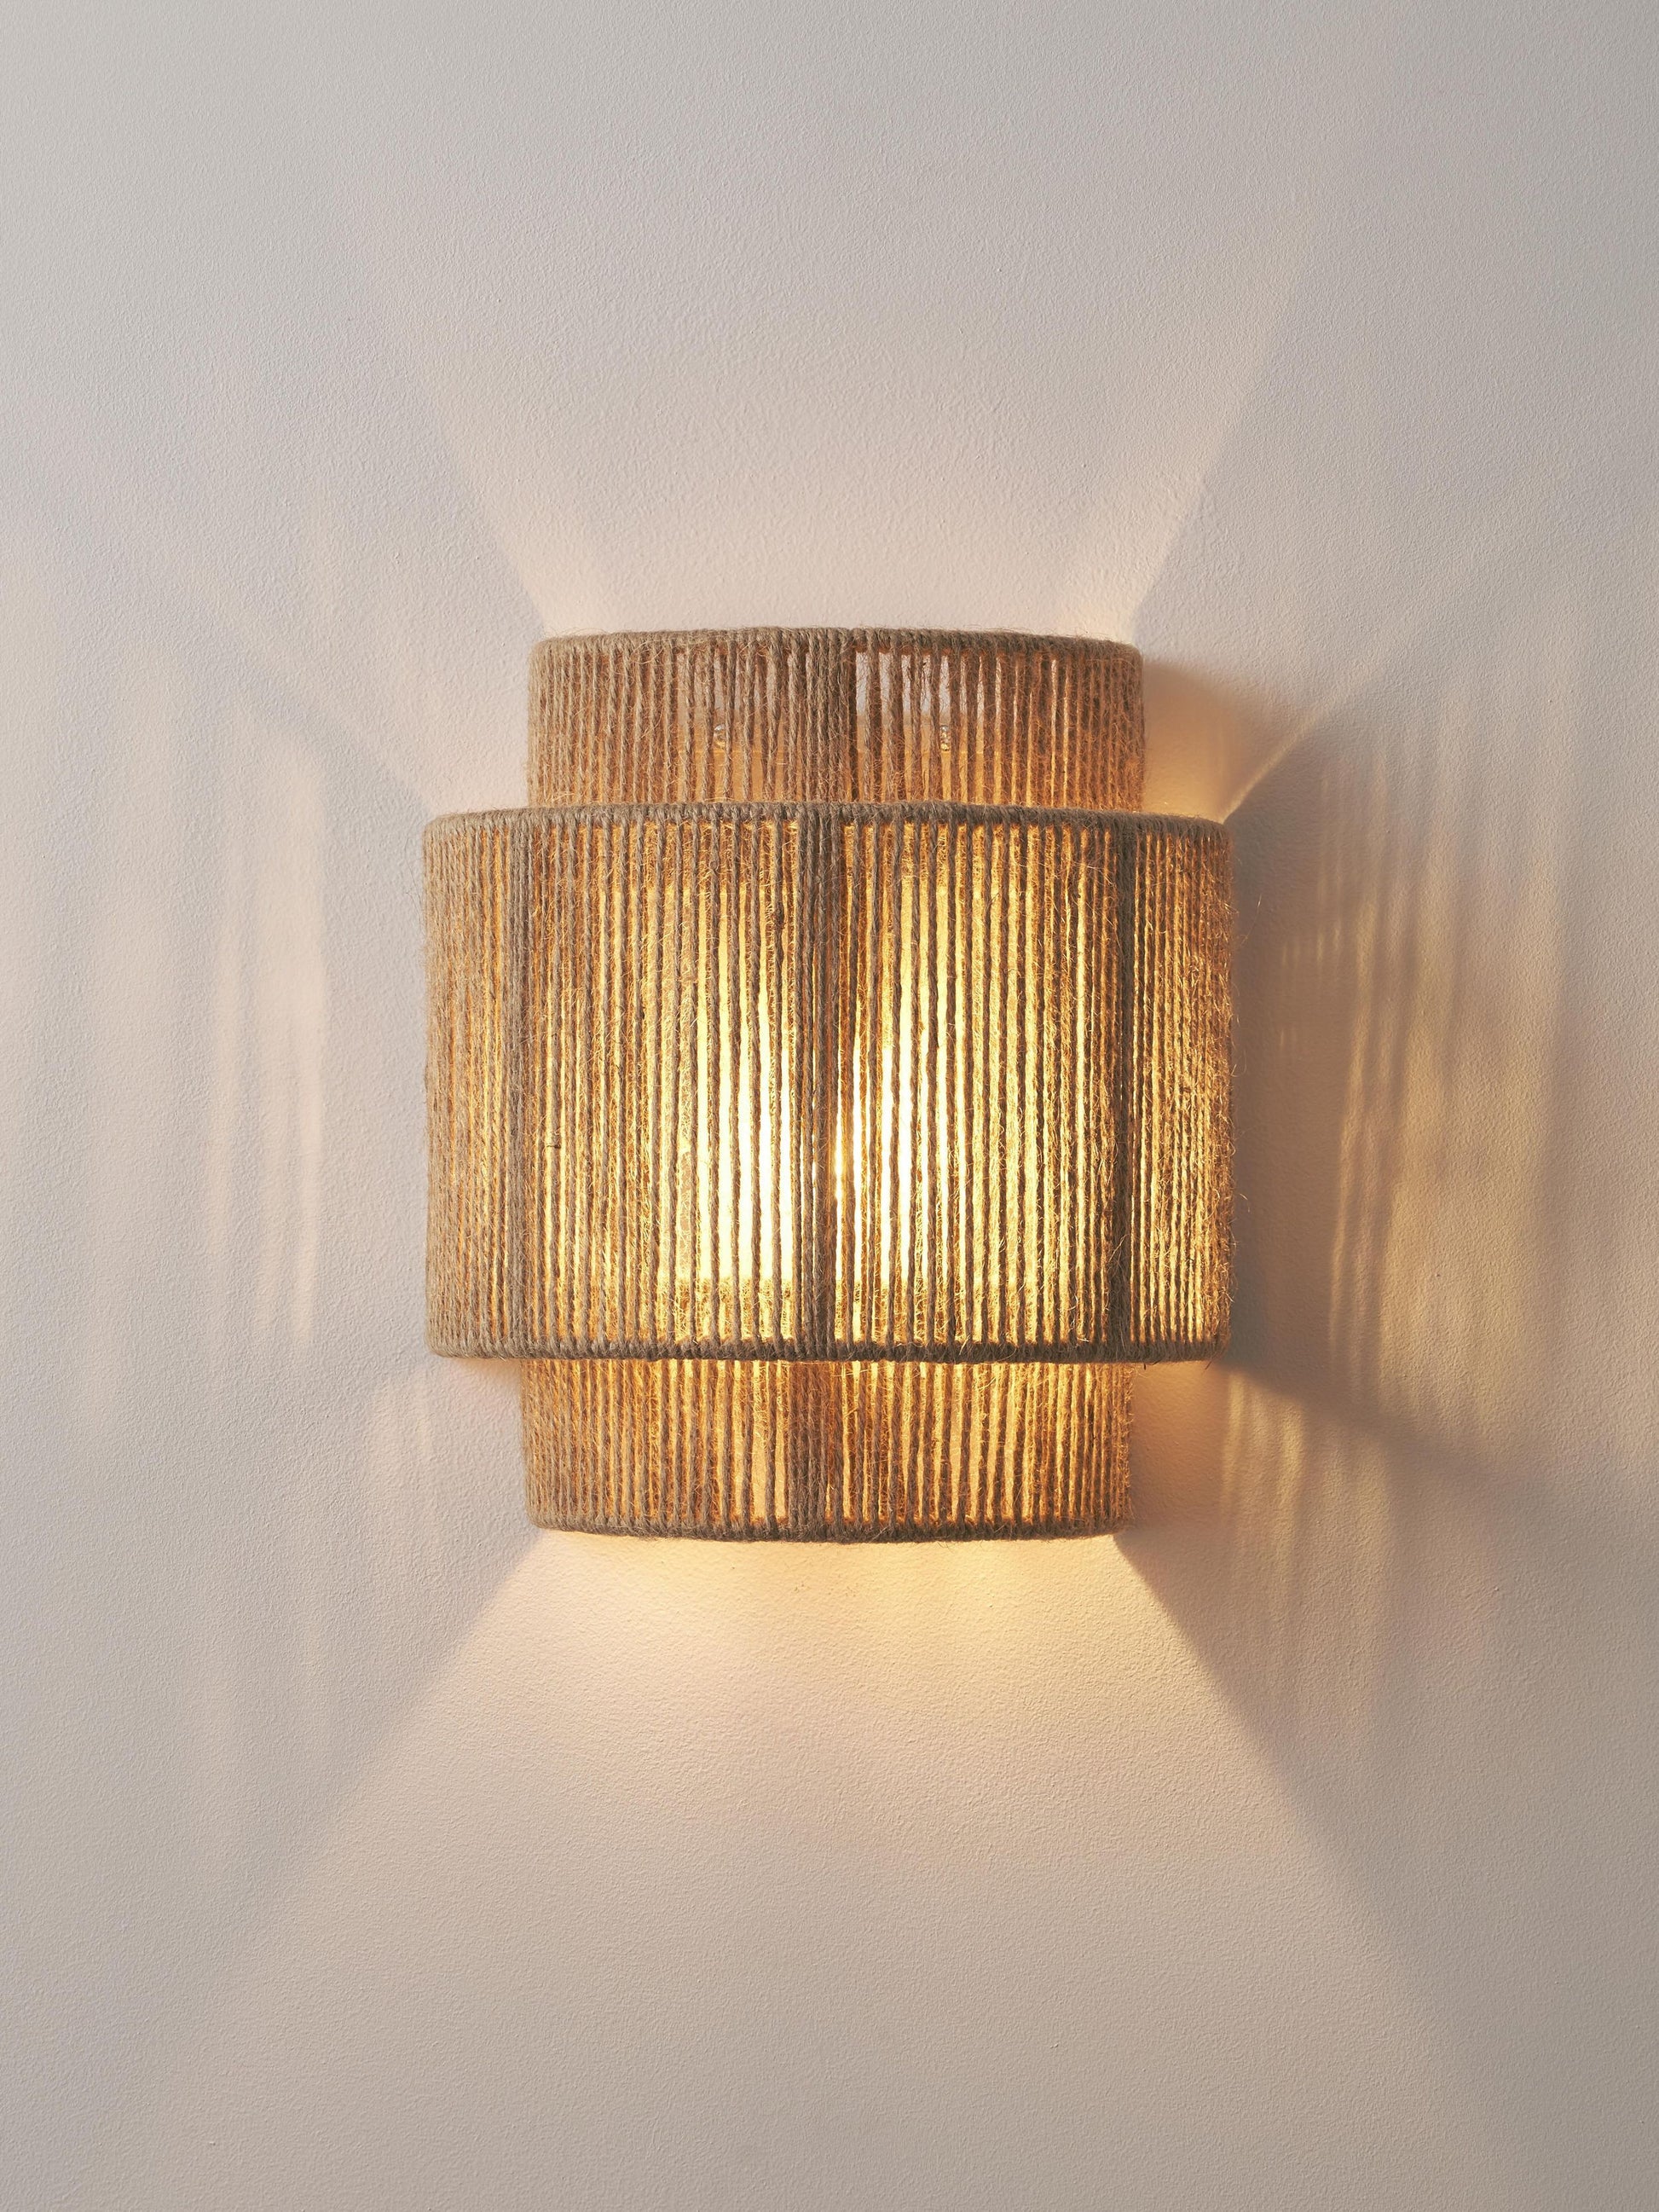 Bamboo Wall lamps For Living Room | Rattan Wall scones | Wicker Wall Lamps | Cane Wall Scones - Akanksh - Akway